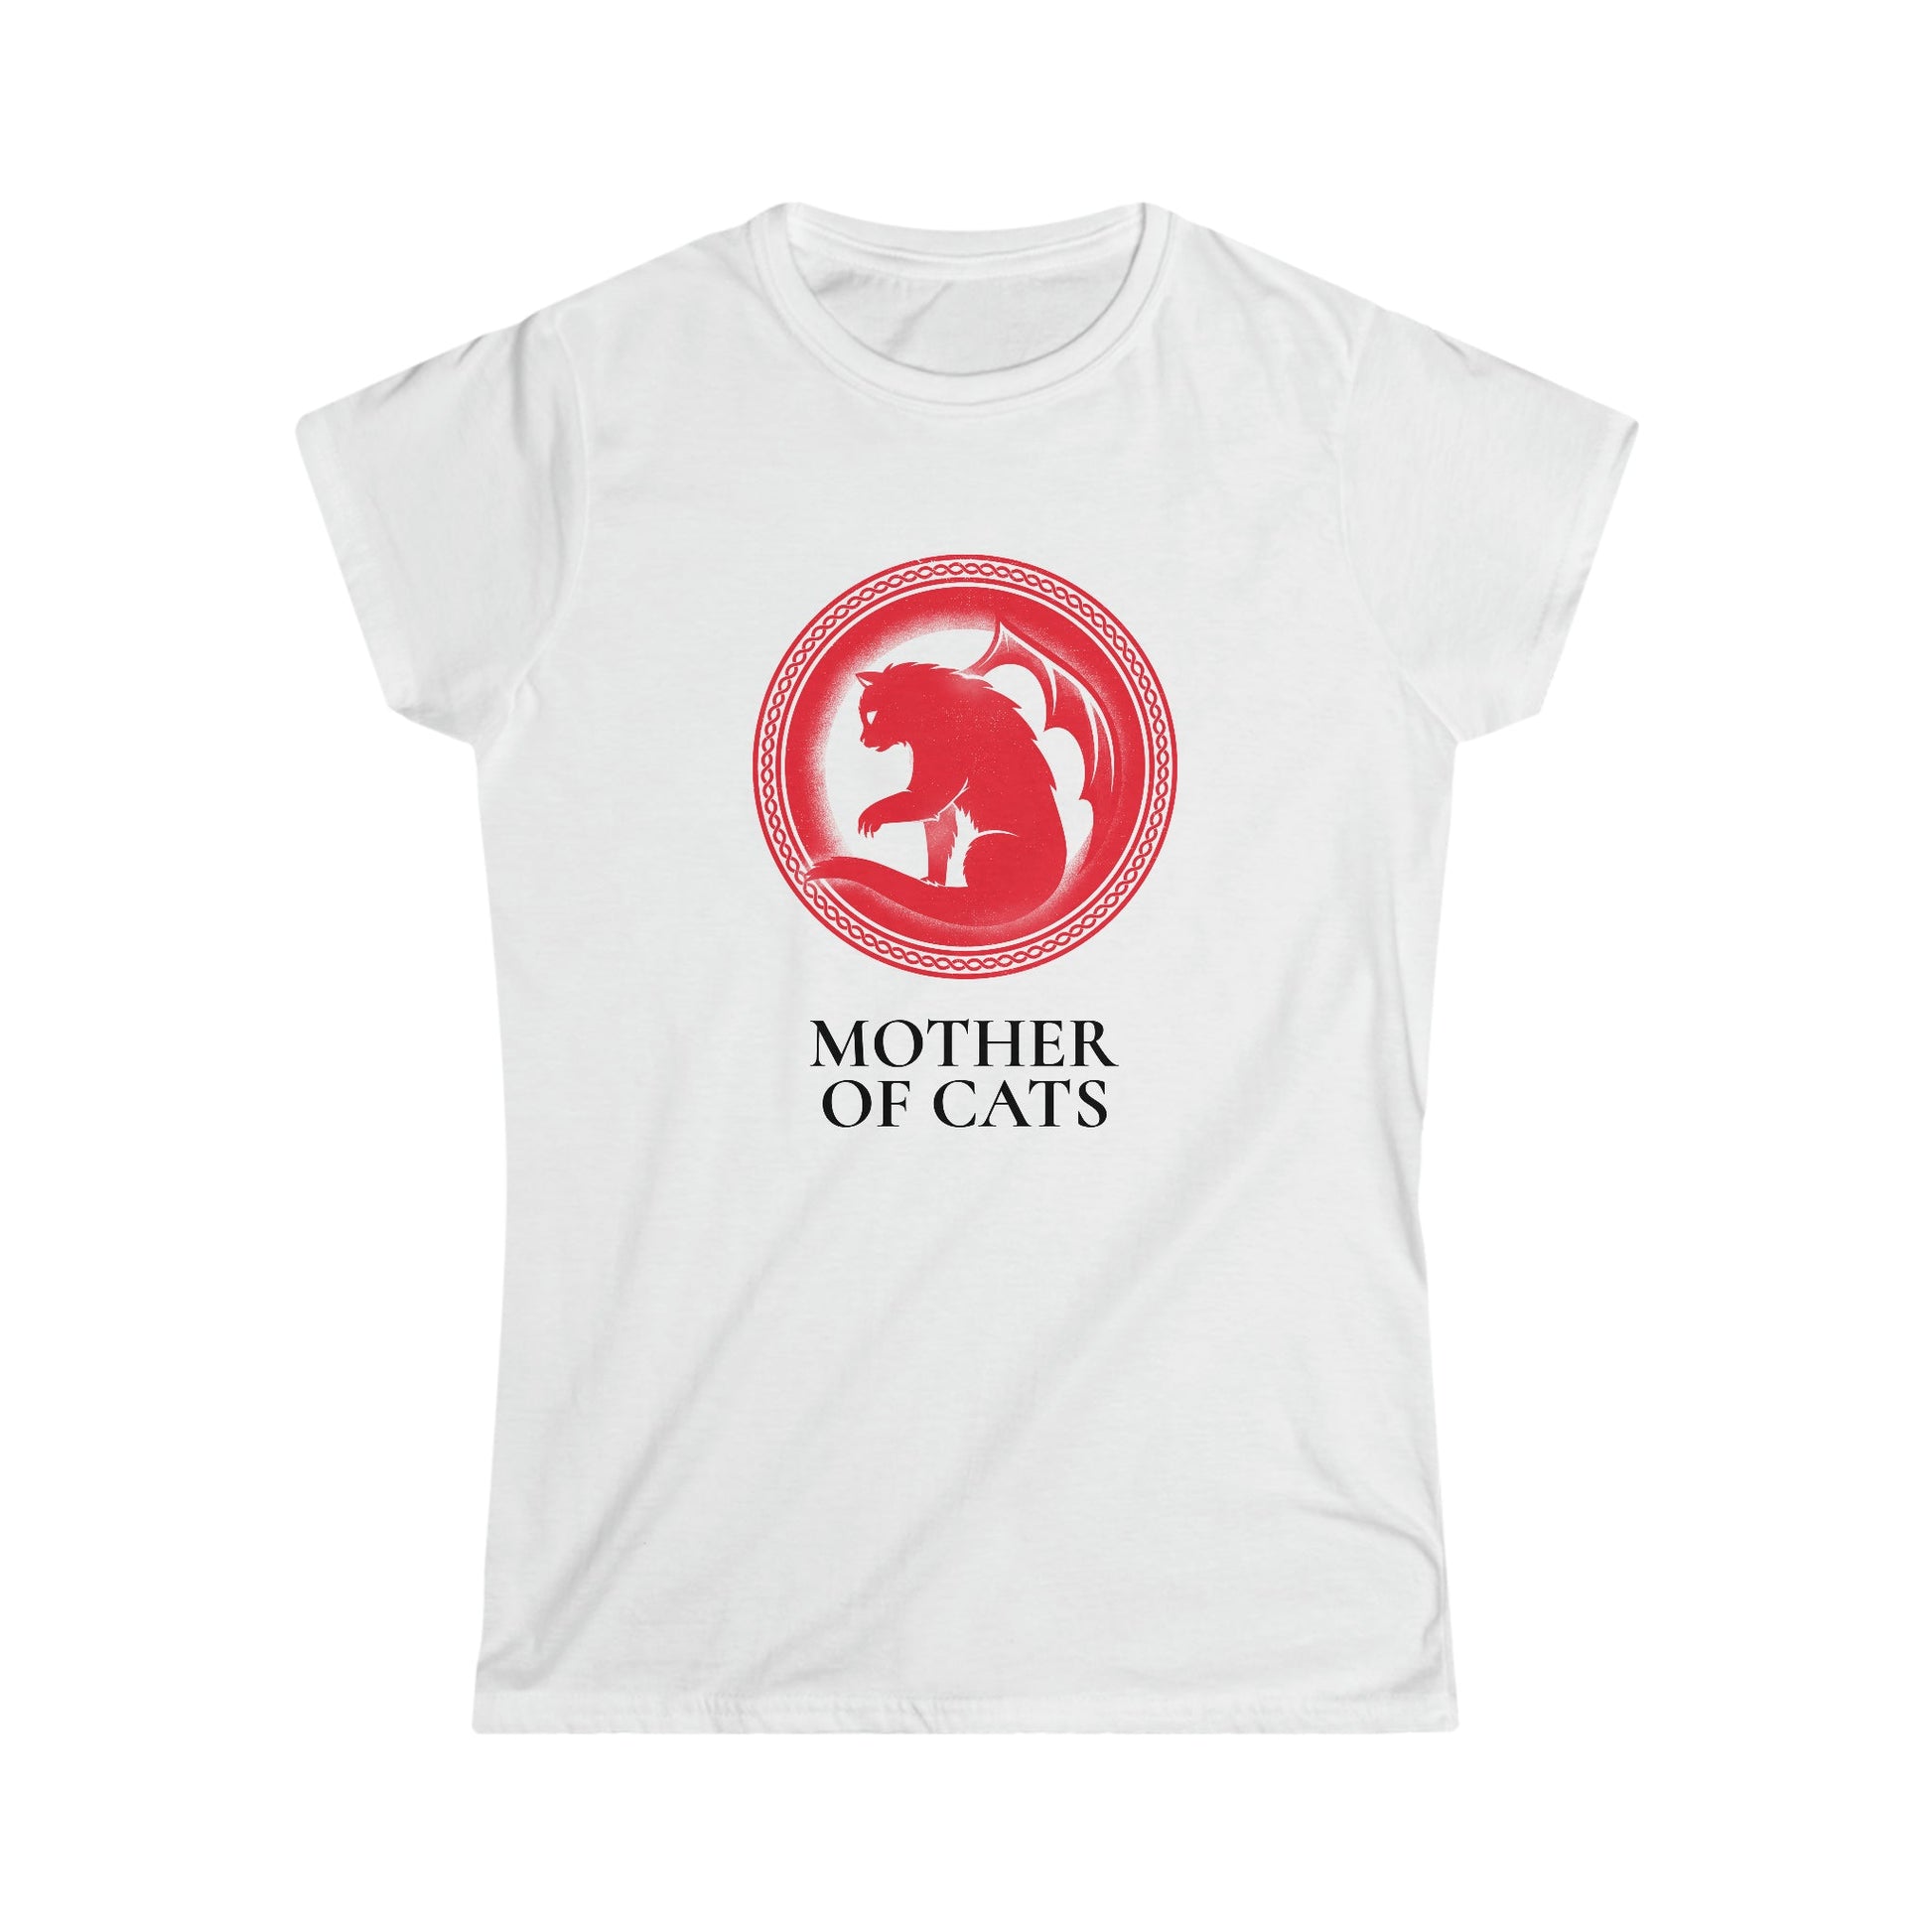 CrazyYetiClothing, CYC, Mother of Cats (Women's Softstyle Tee), T-Shirt